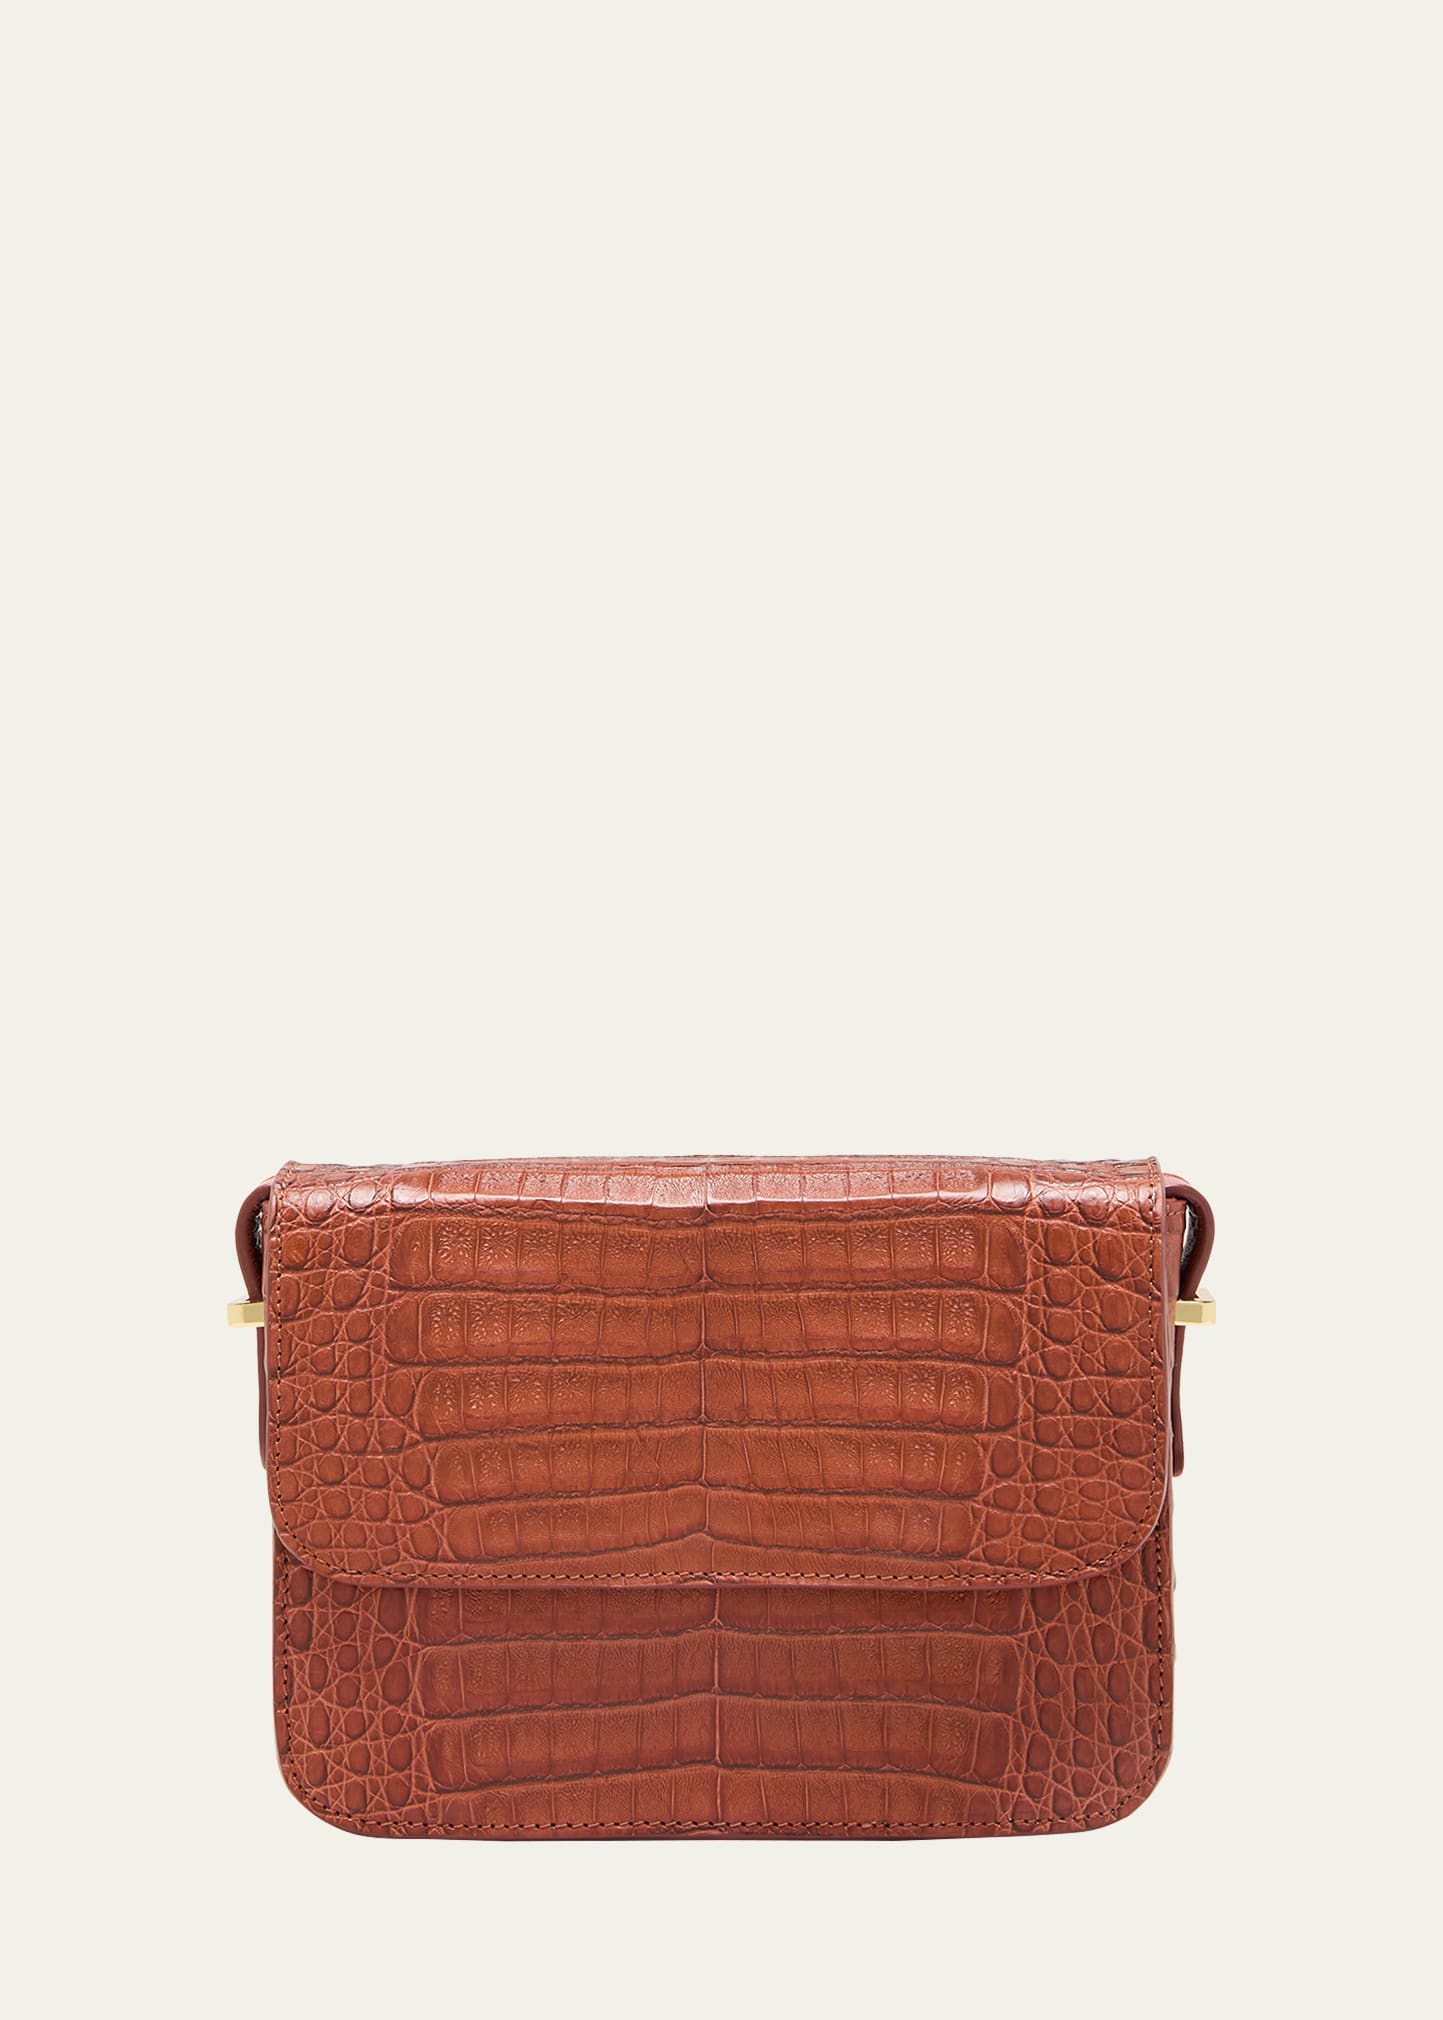 Maria Oliver Audry Crocodile Flap Crossbody Bag In Tile 27